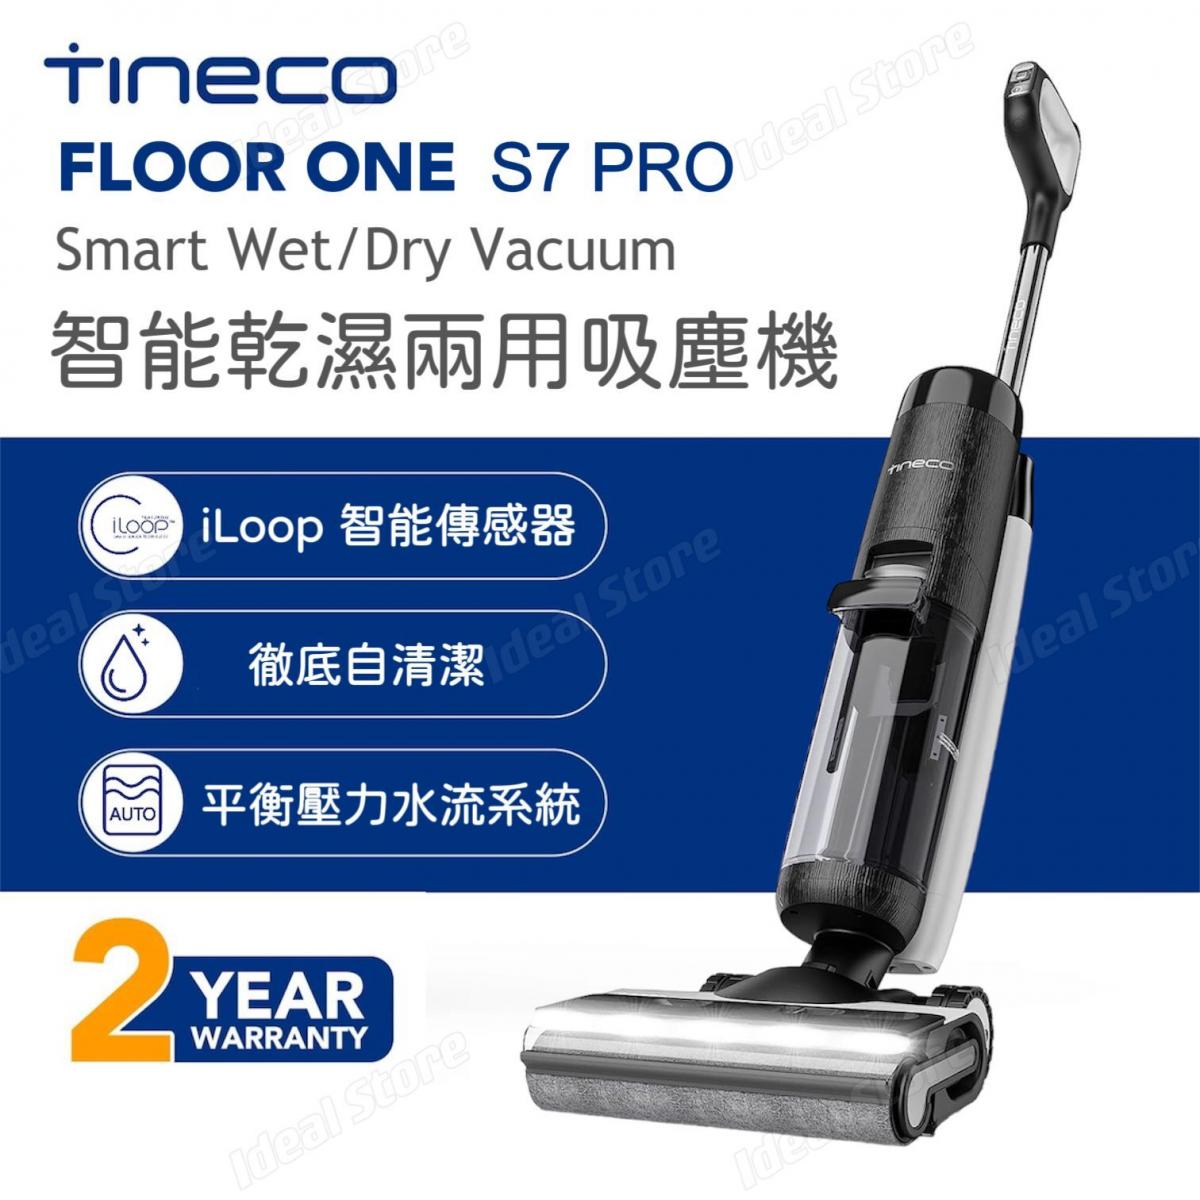 Introducing Tineco FLOOR ONE S7 PRO- a new definition of clean